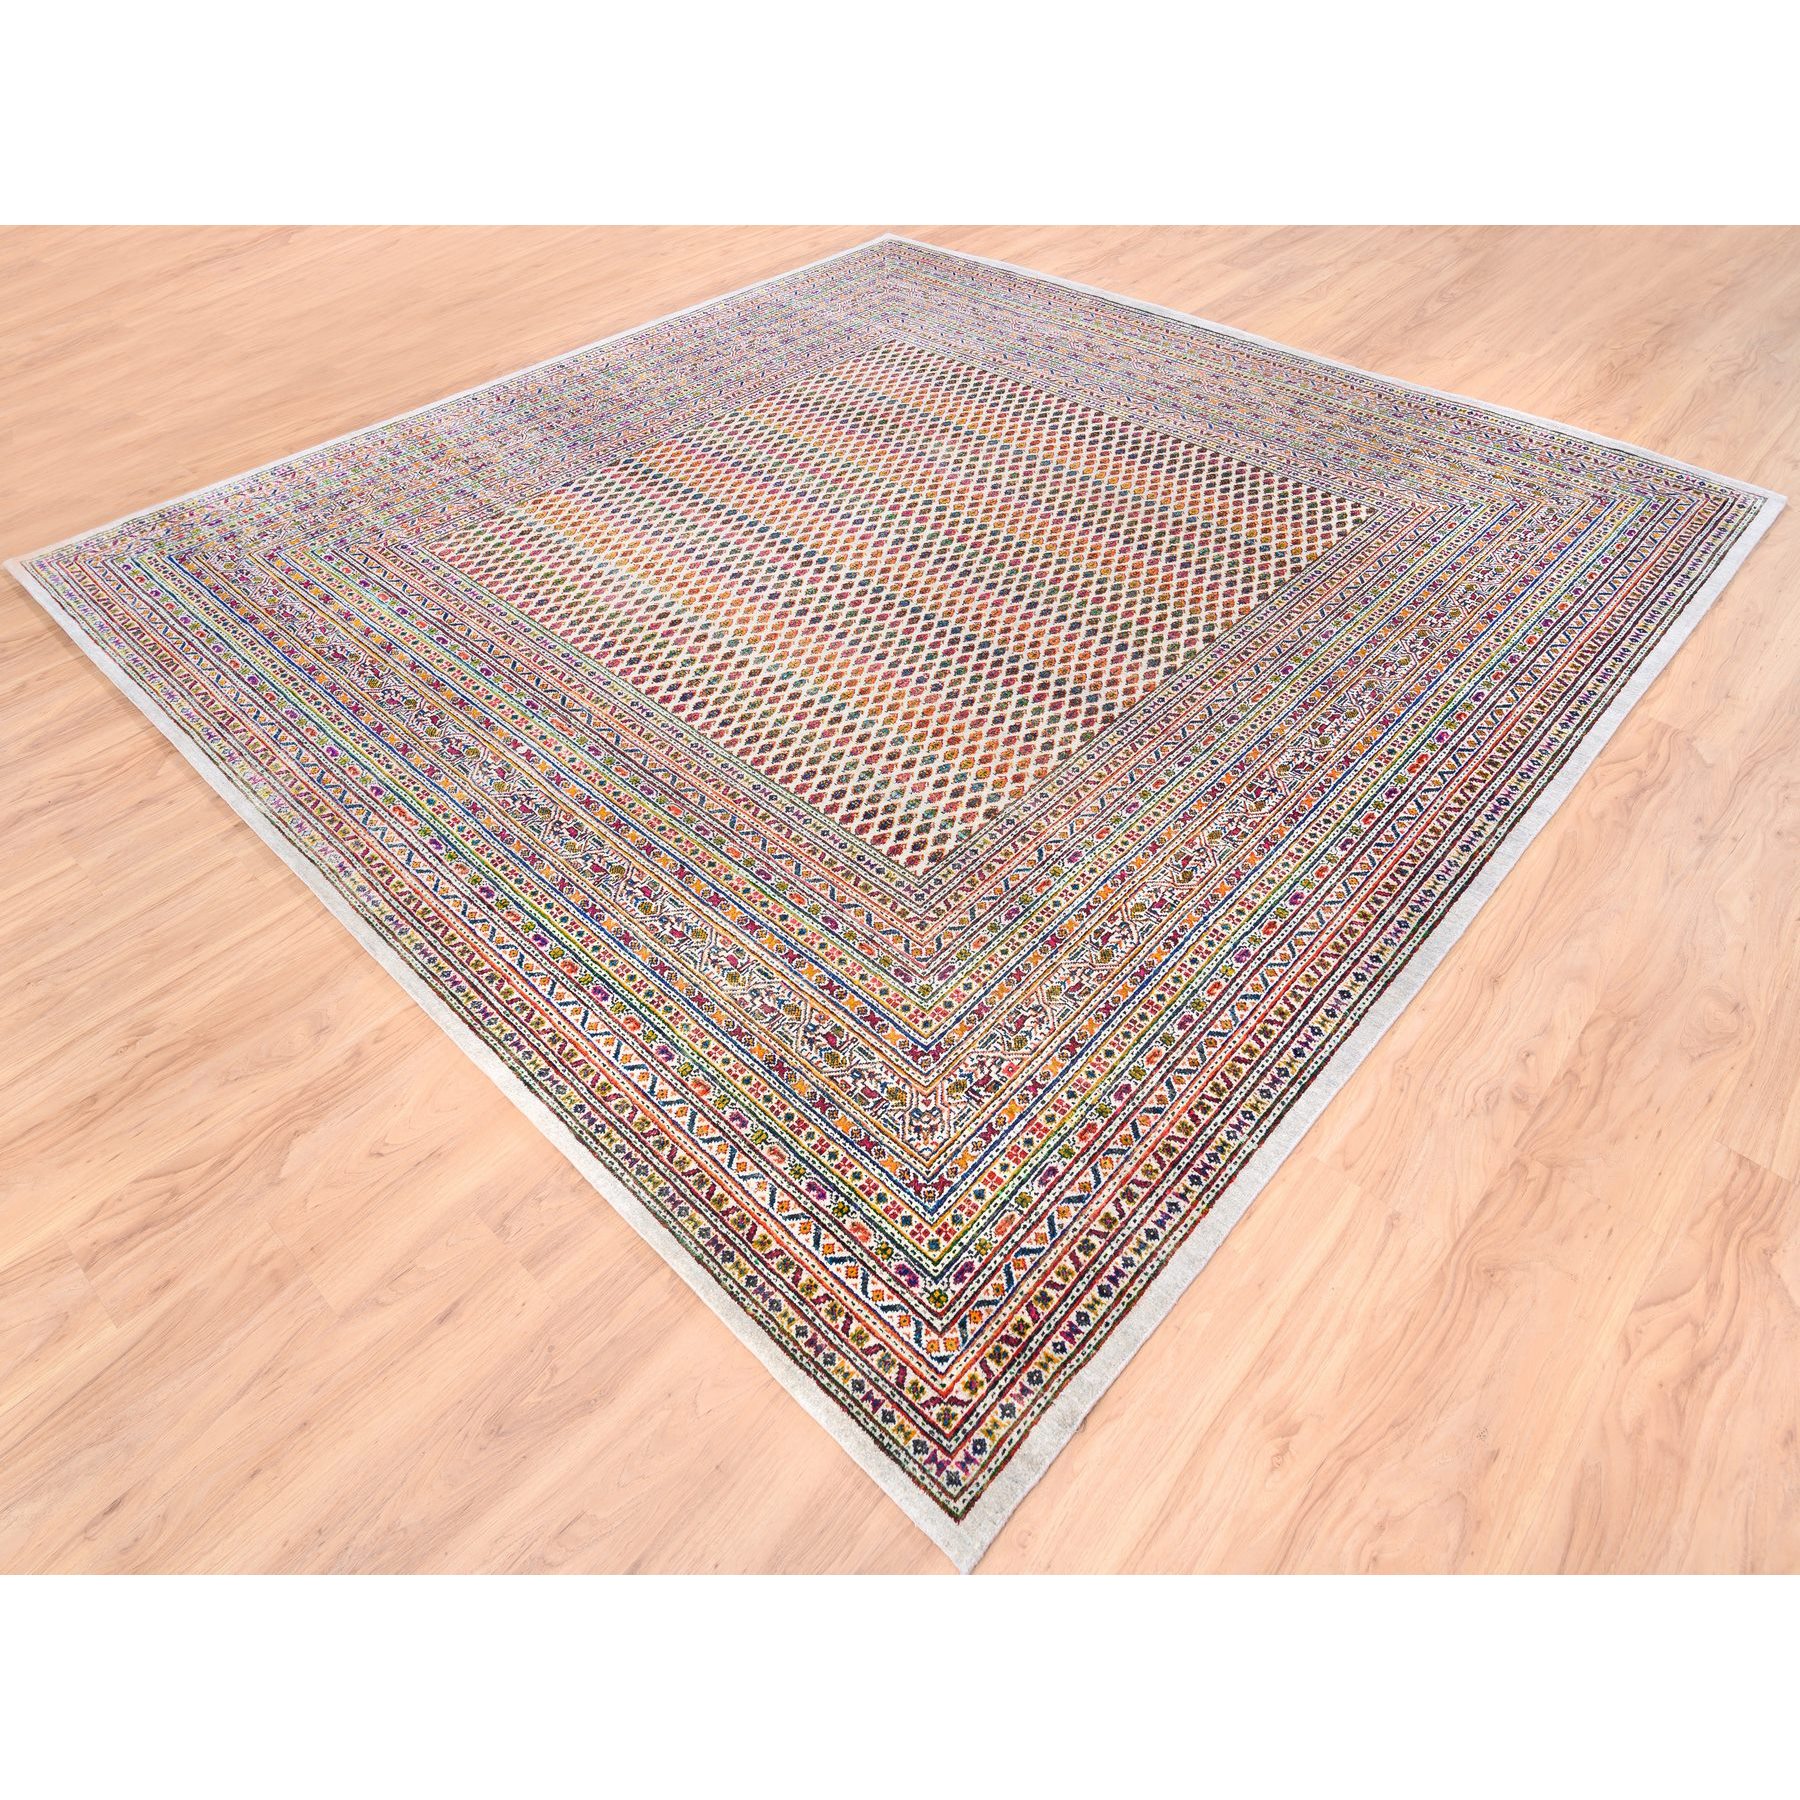 10'1"x10'1" Colorful Wool And Sari Silk Sarouk Mir Inspired With Multiple Borders Hand Woven Oriental Square Rug 